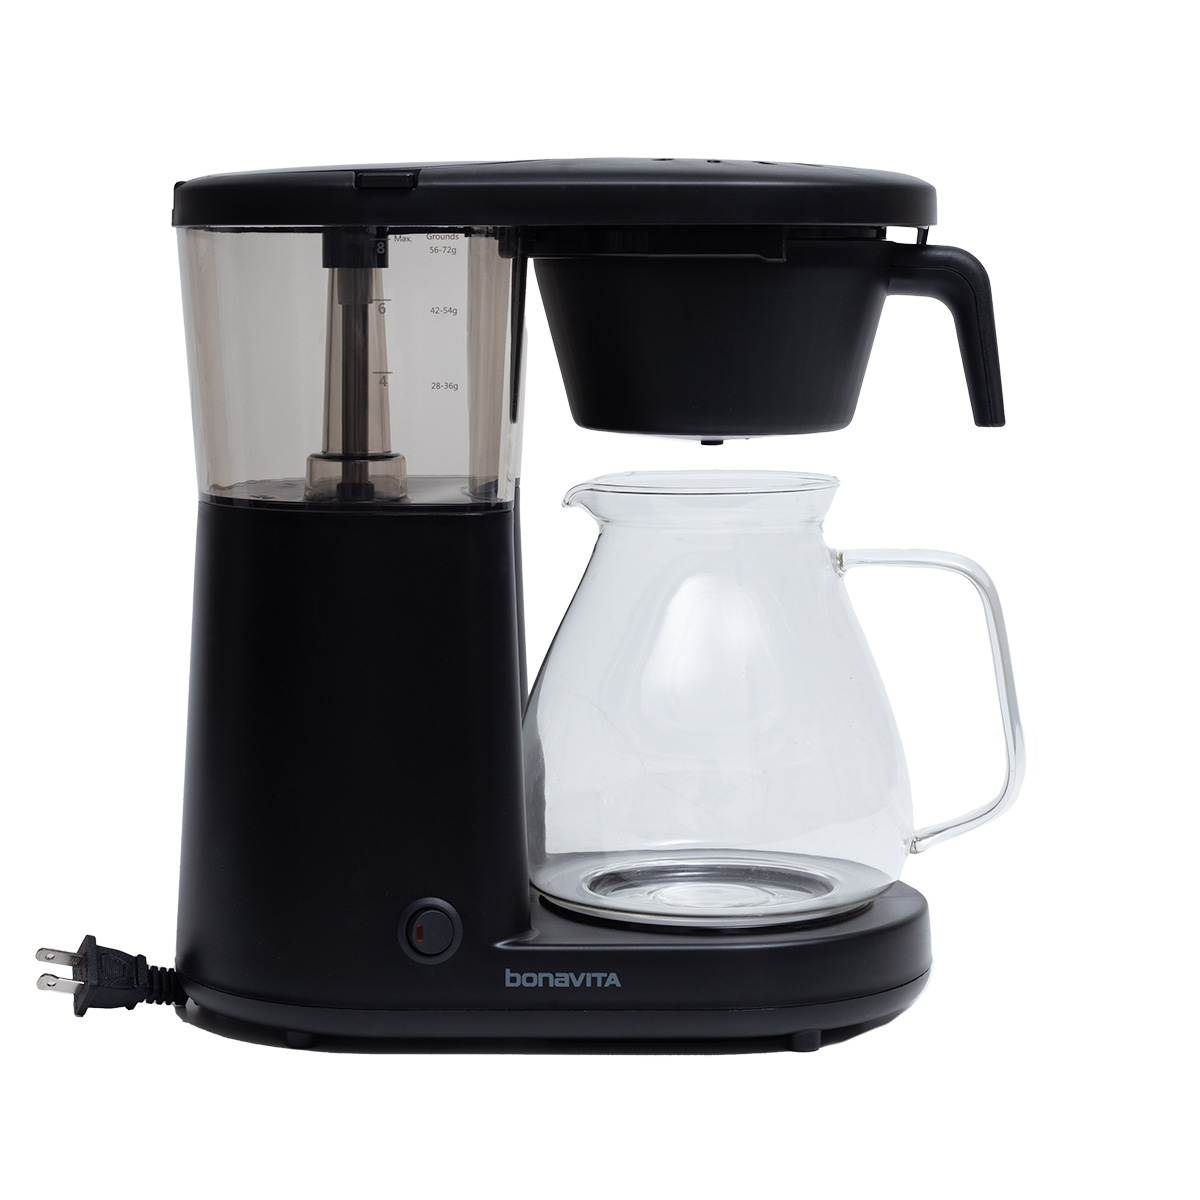 Buy Wholesale China Electric Coffee Maker With Transparent Pot